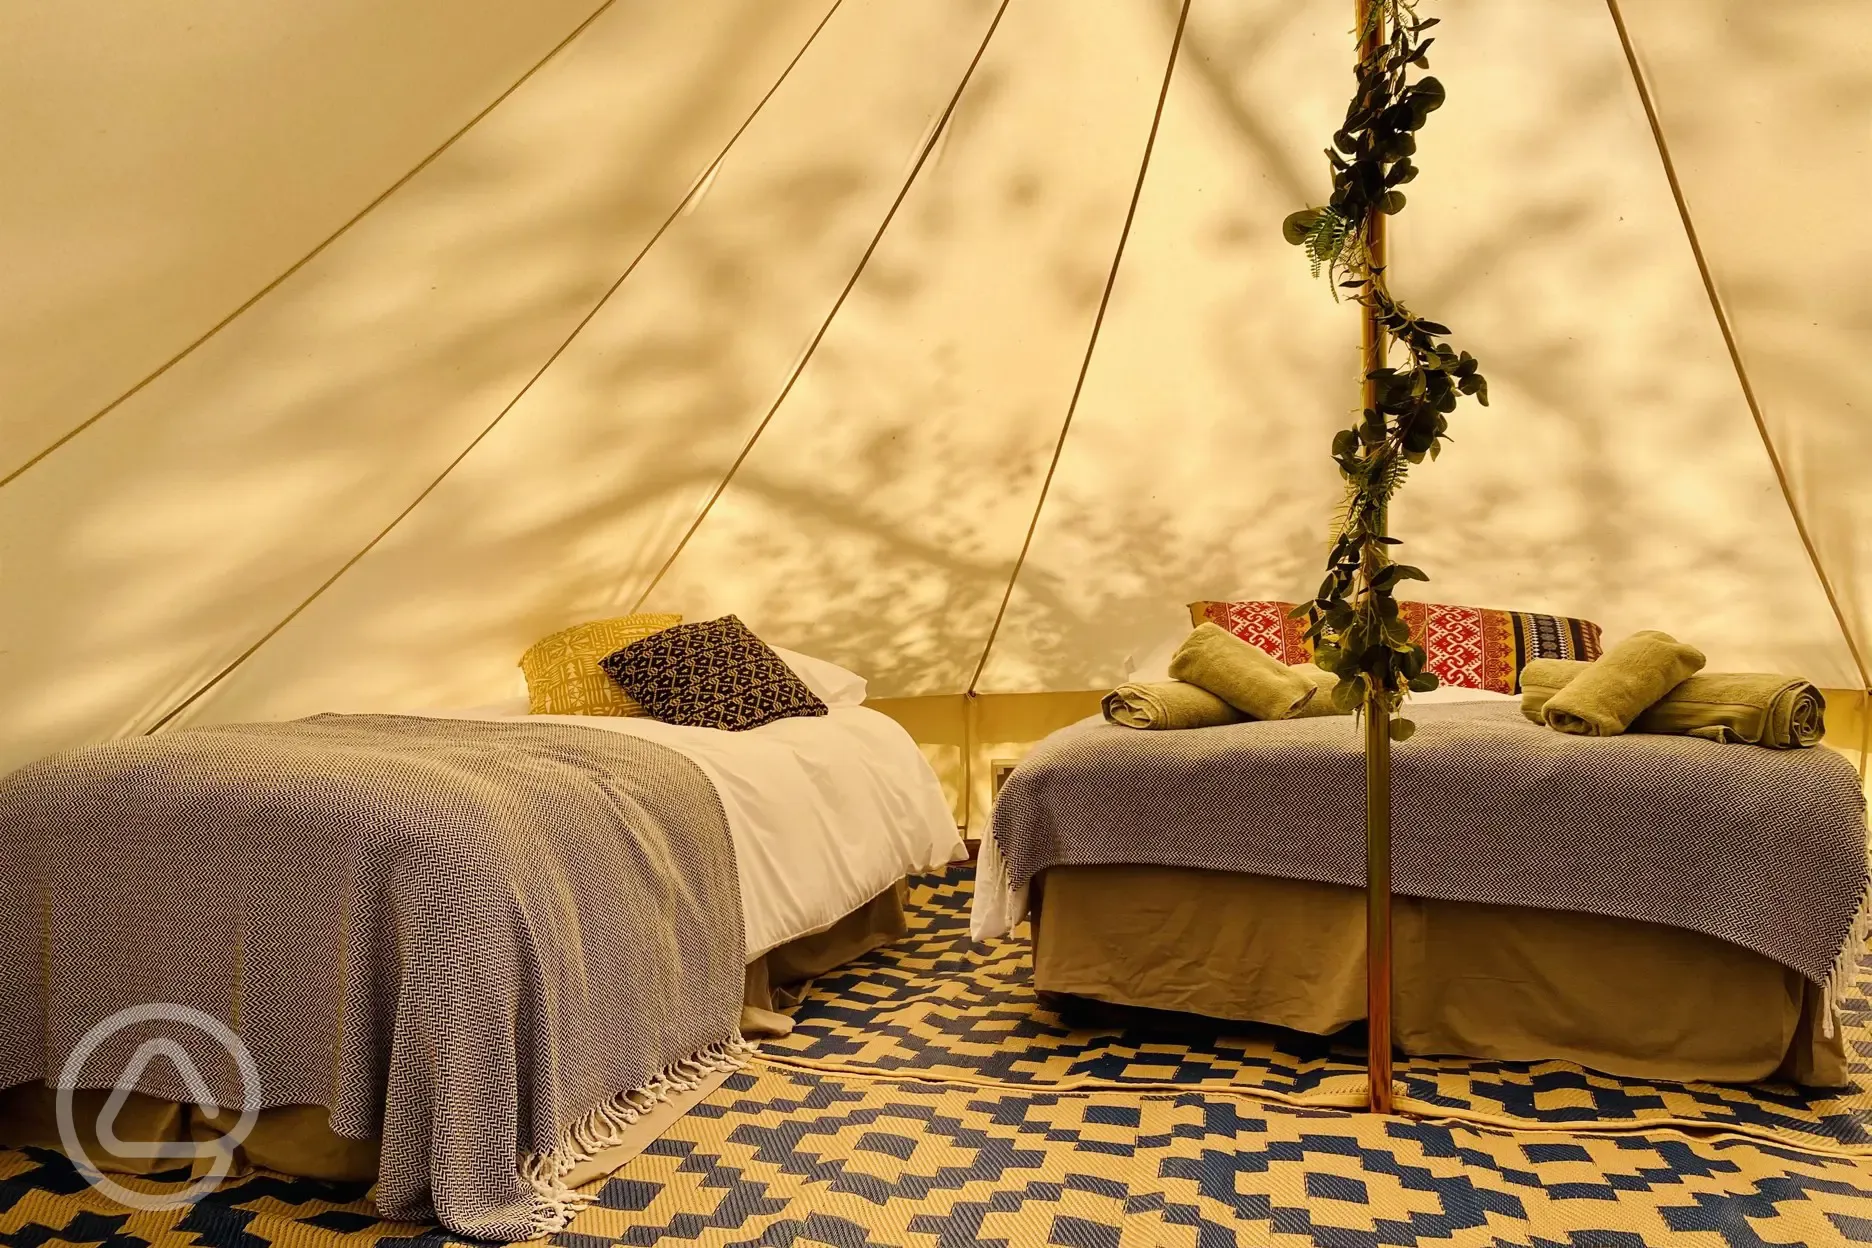 Furnished bell tent interior